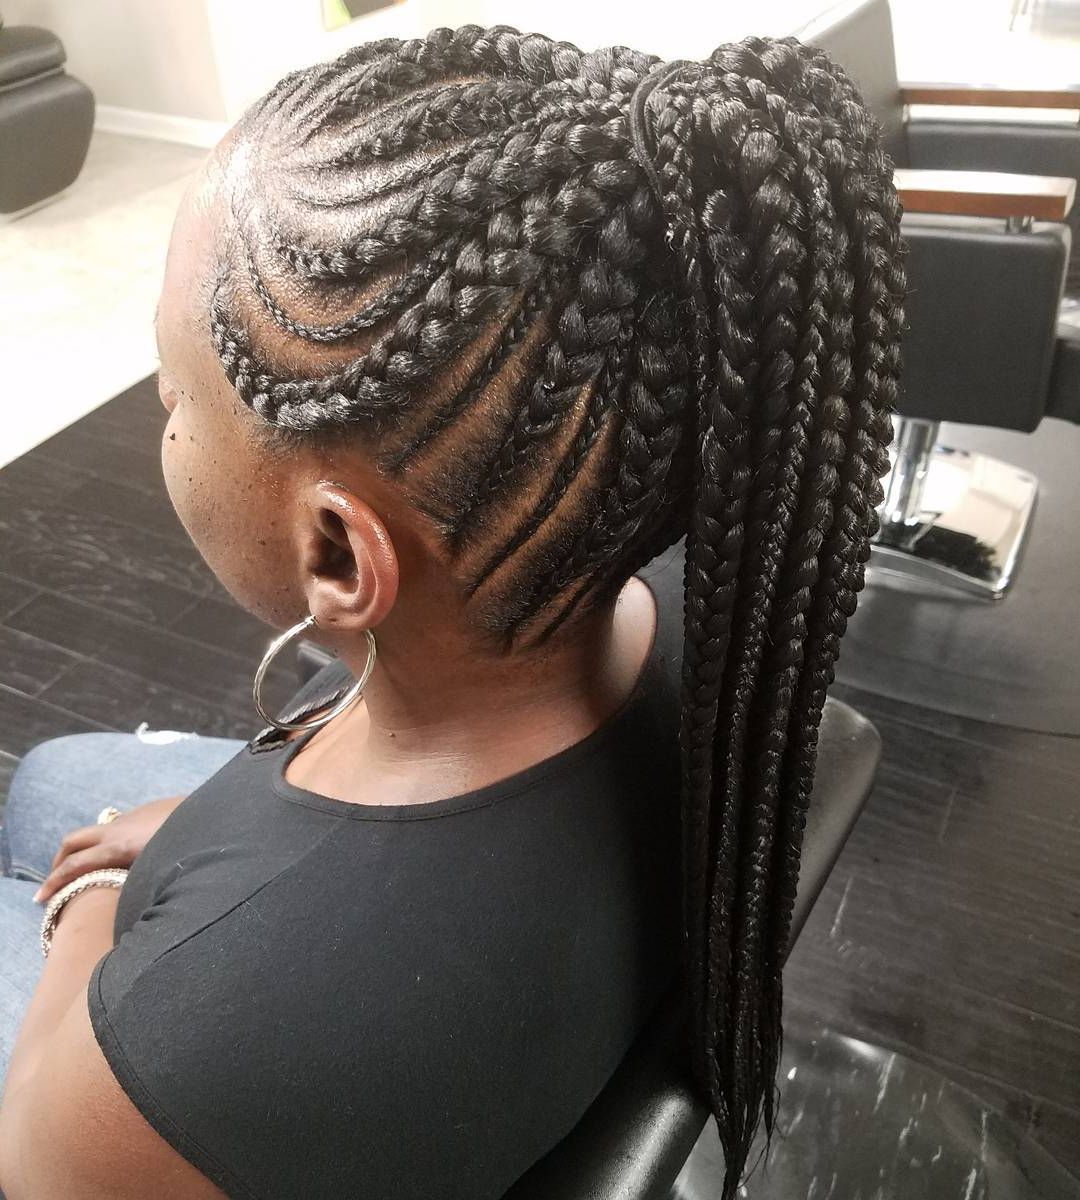 20 Gorgeous Ghana Braids For An Intricate Hairdo In 2019 With Best And Newest Side Design Micro Braid Hairstyles (View 19 of 20)